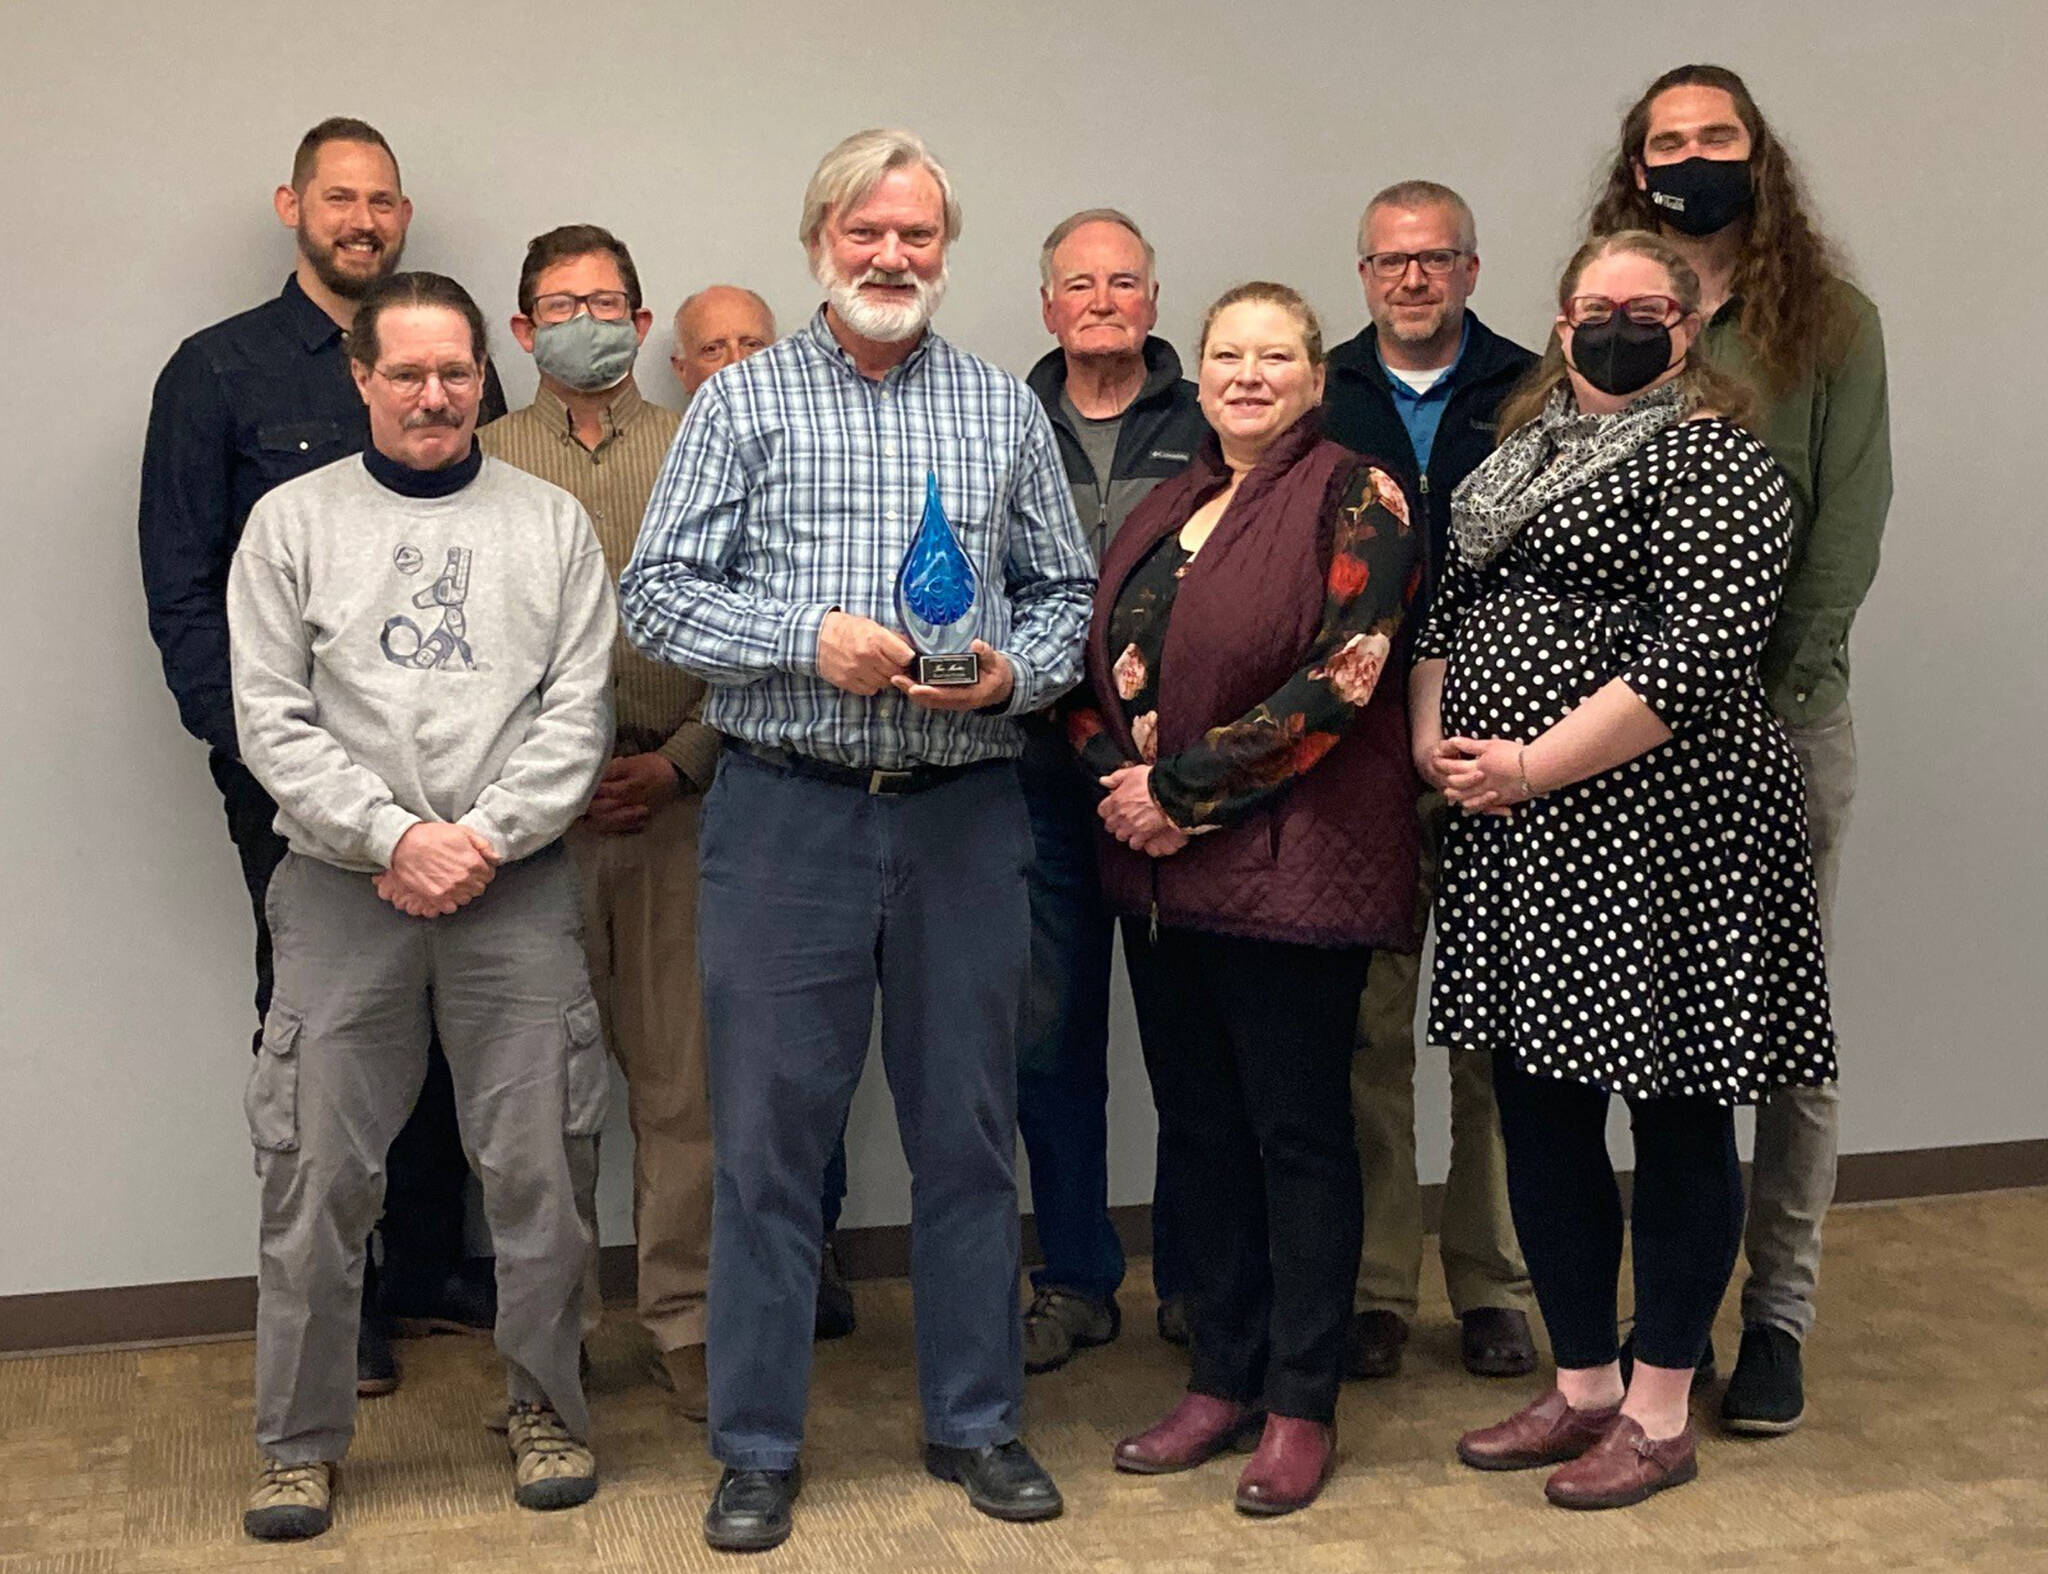 Tom Martin, Water and Wastewater Manager with Clallam County Public Utility District No. 1, accepts his “Grace Under Pressure” award at an April 25 board of commissioners meeting. Photo courtesy of Clallam County Public Utility District No. 1